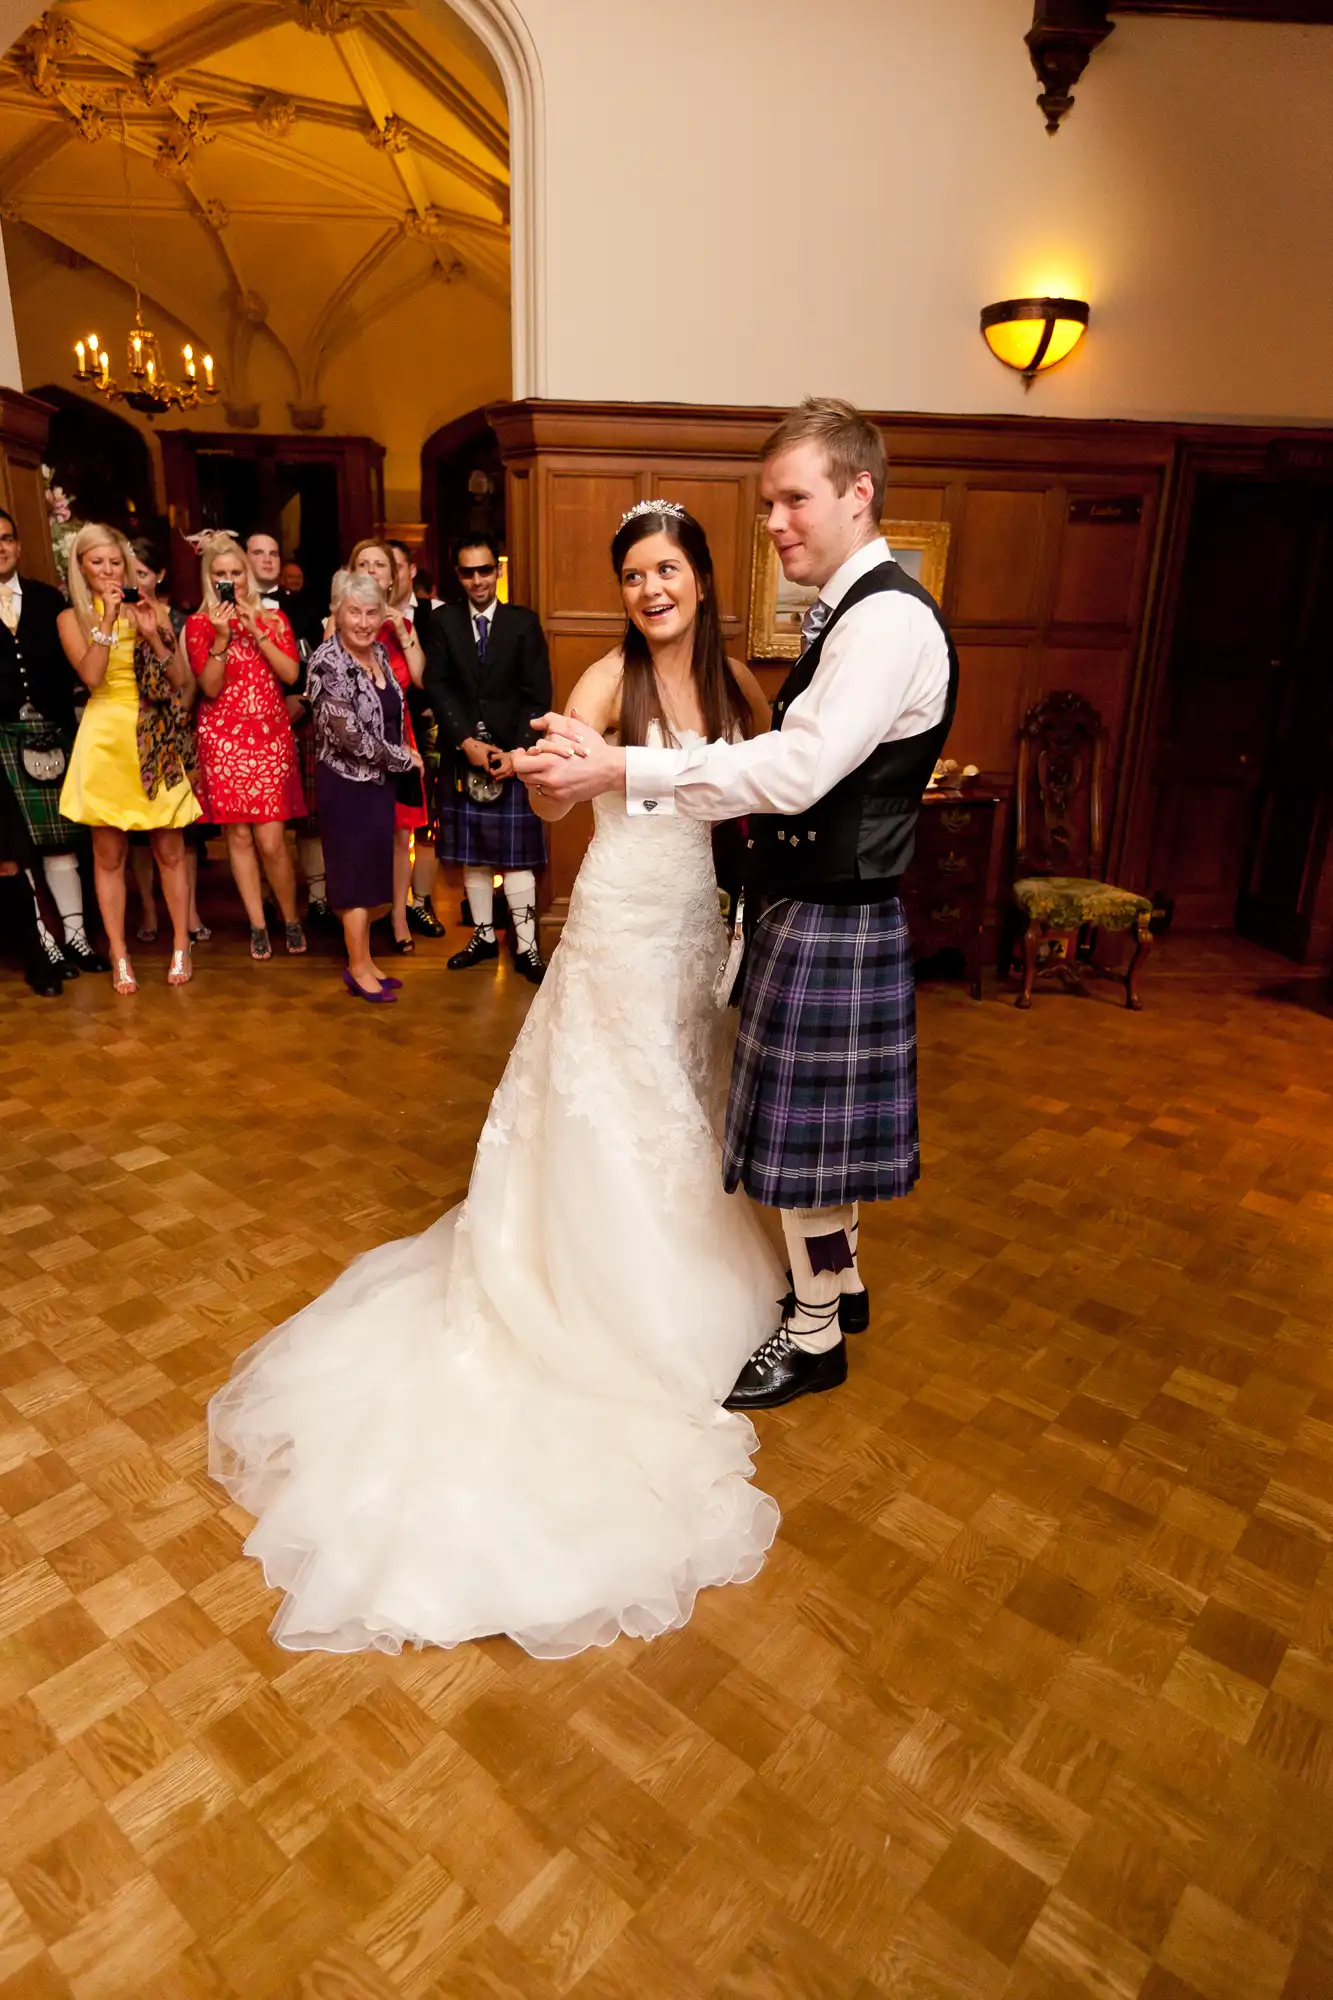 A bride in a white gown and a groom in a kilt dancing at a wedding reception, with guests watching in the background.